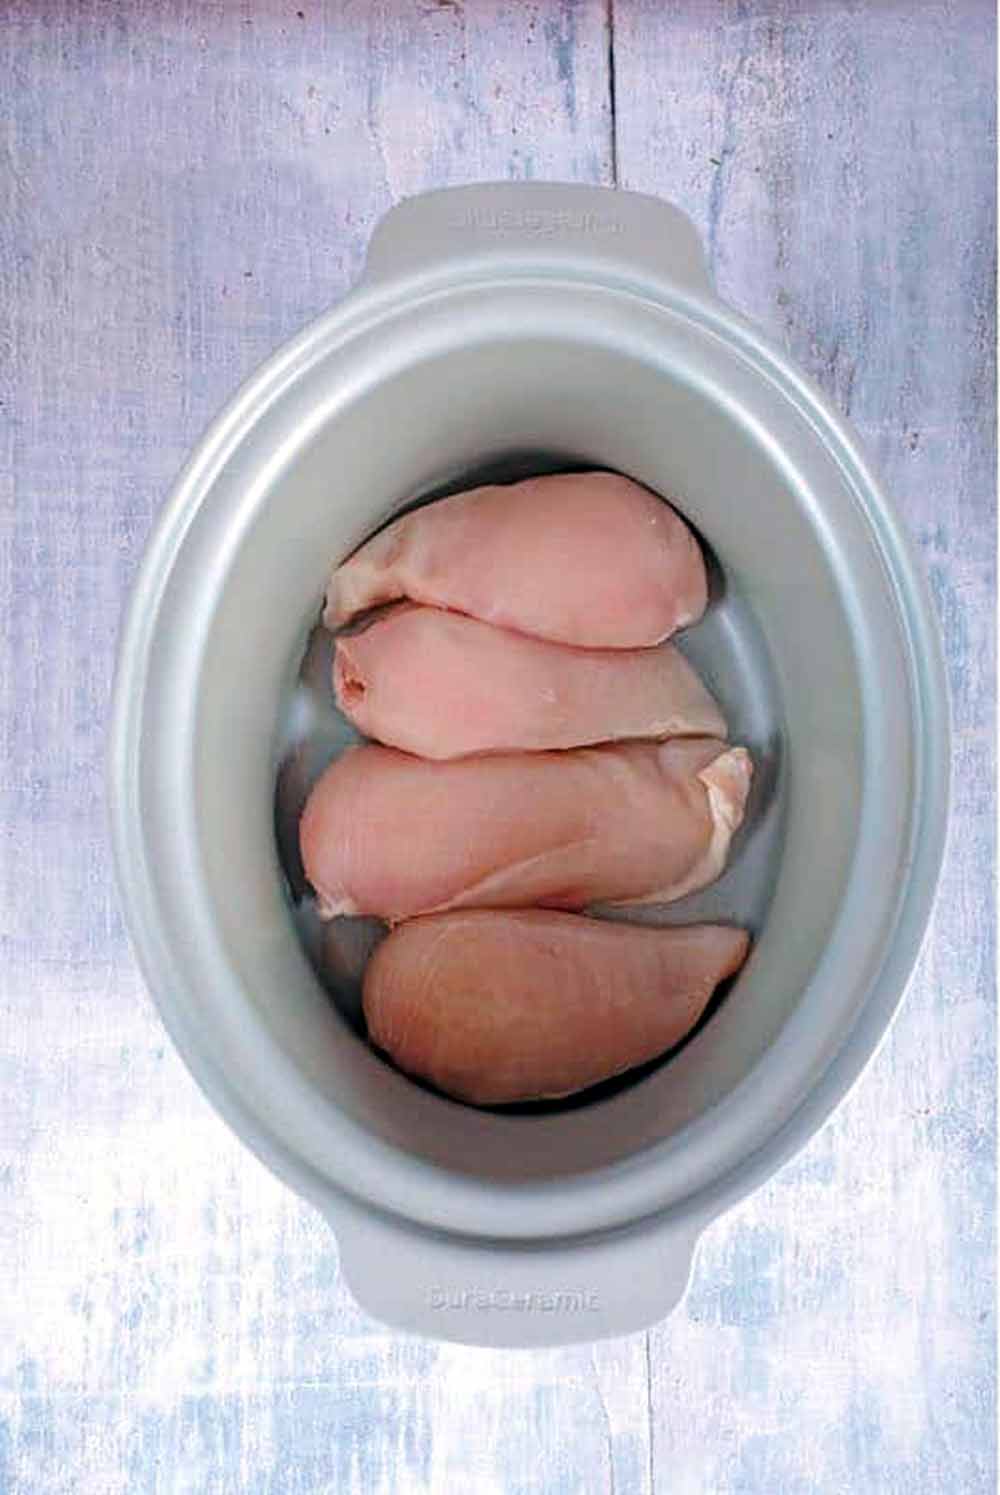 Four raw chicken breasts in a slow cooker pot.